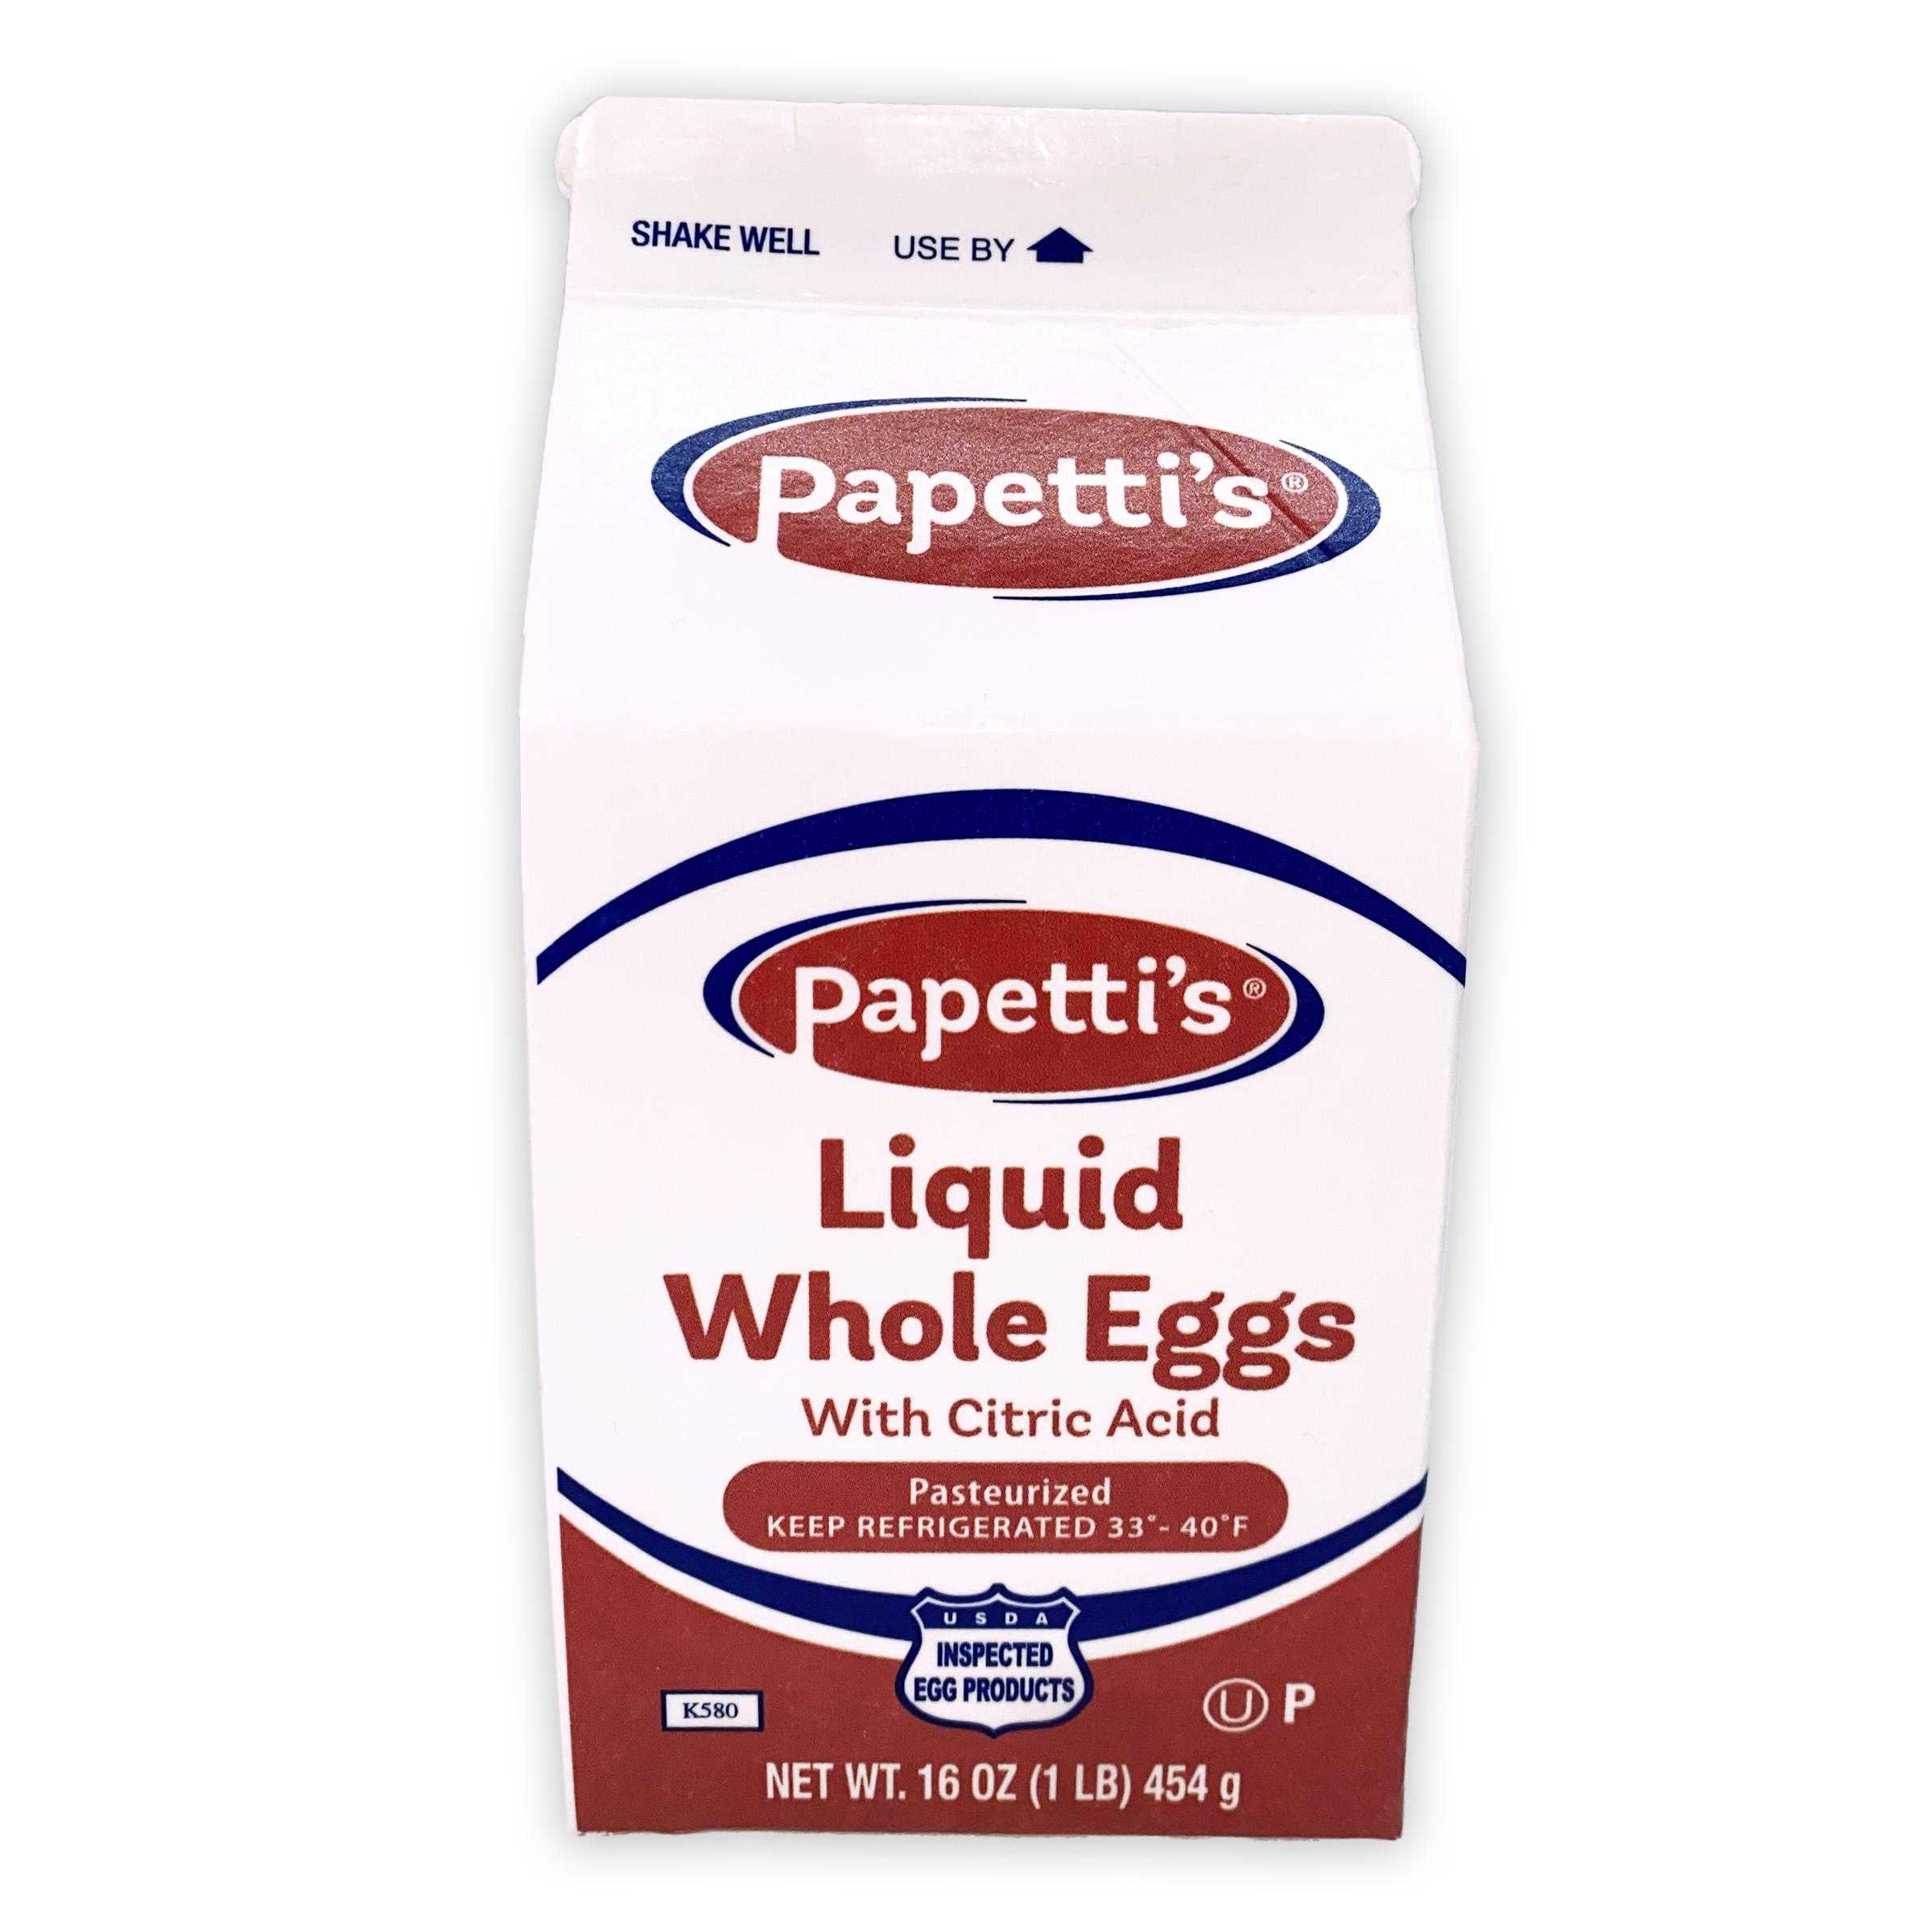 Papetti’s® Refrigerated Liquid Whole Eggs with Citric Acid, 15/1 Lb Cartons